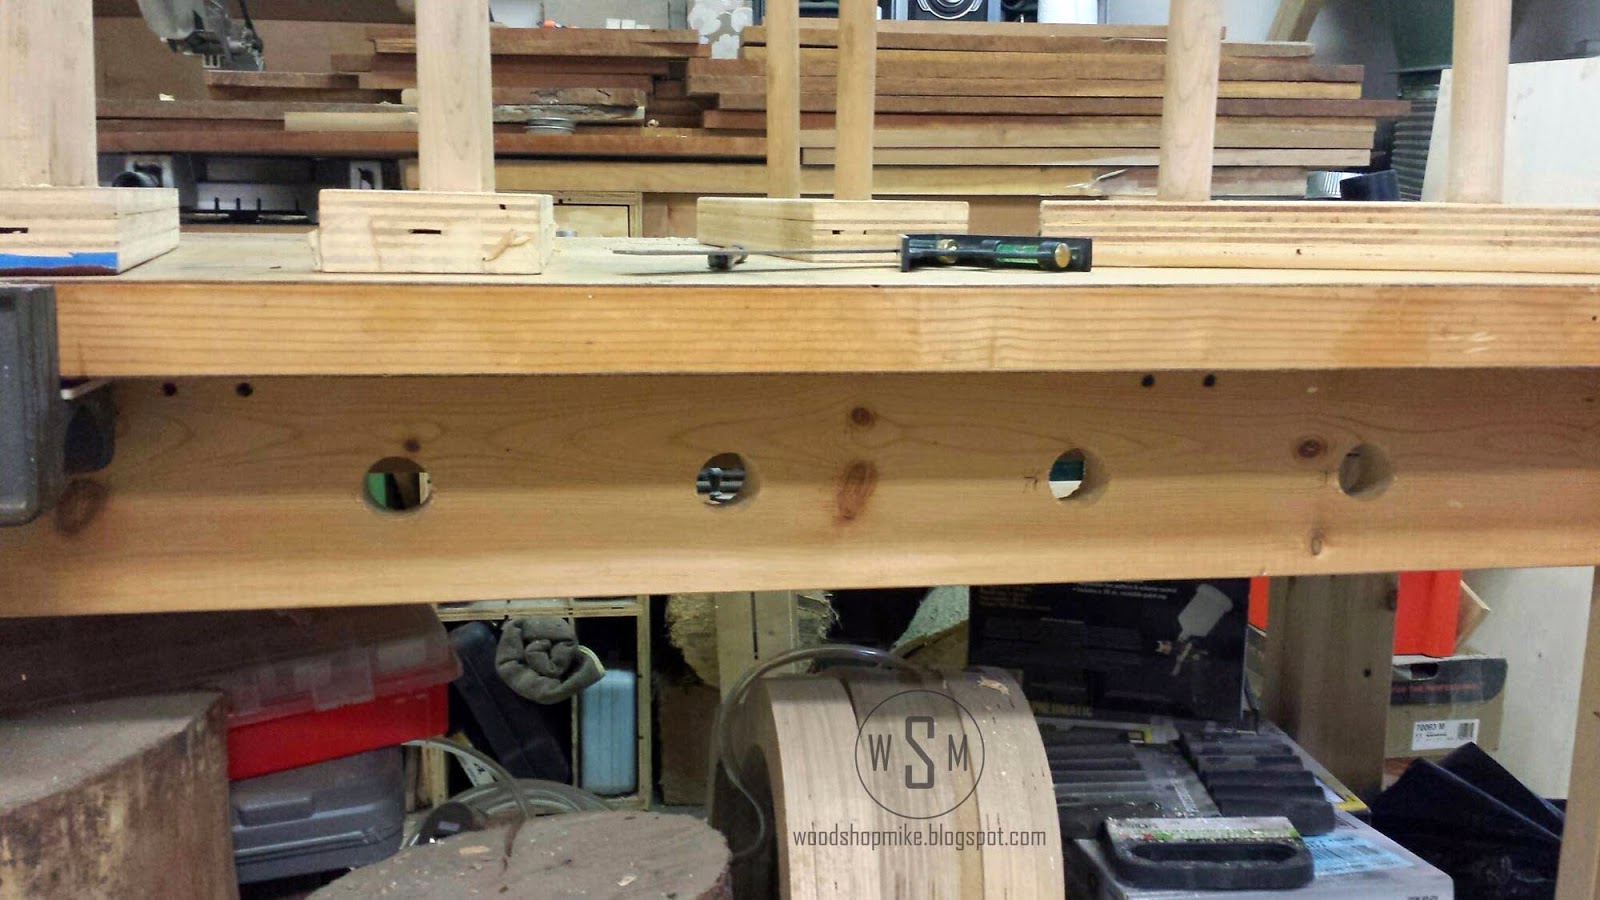 Work Bench Storage Hack, Keeping Sanding Blocks Out of Sight But Close at Hand